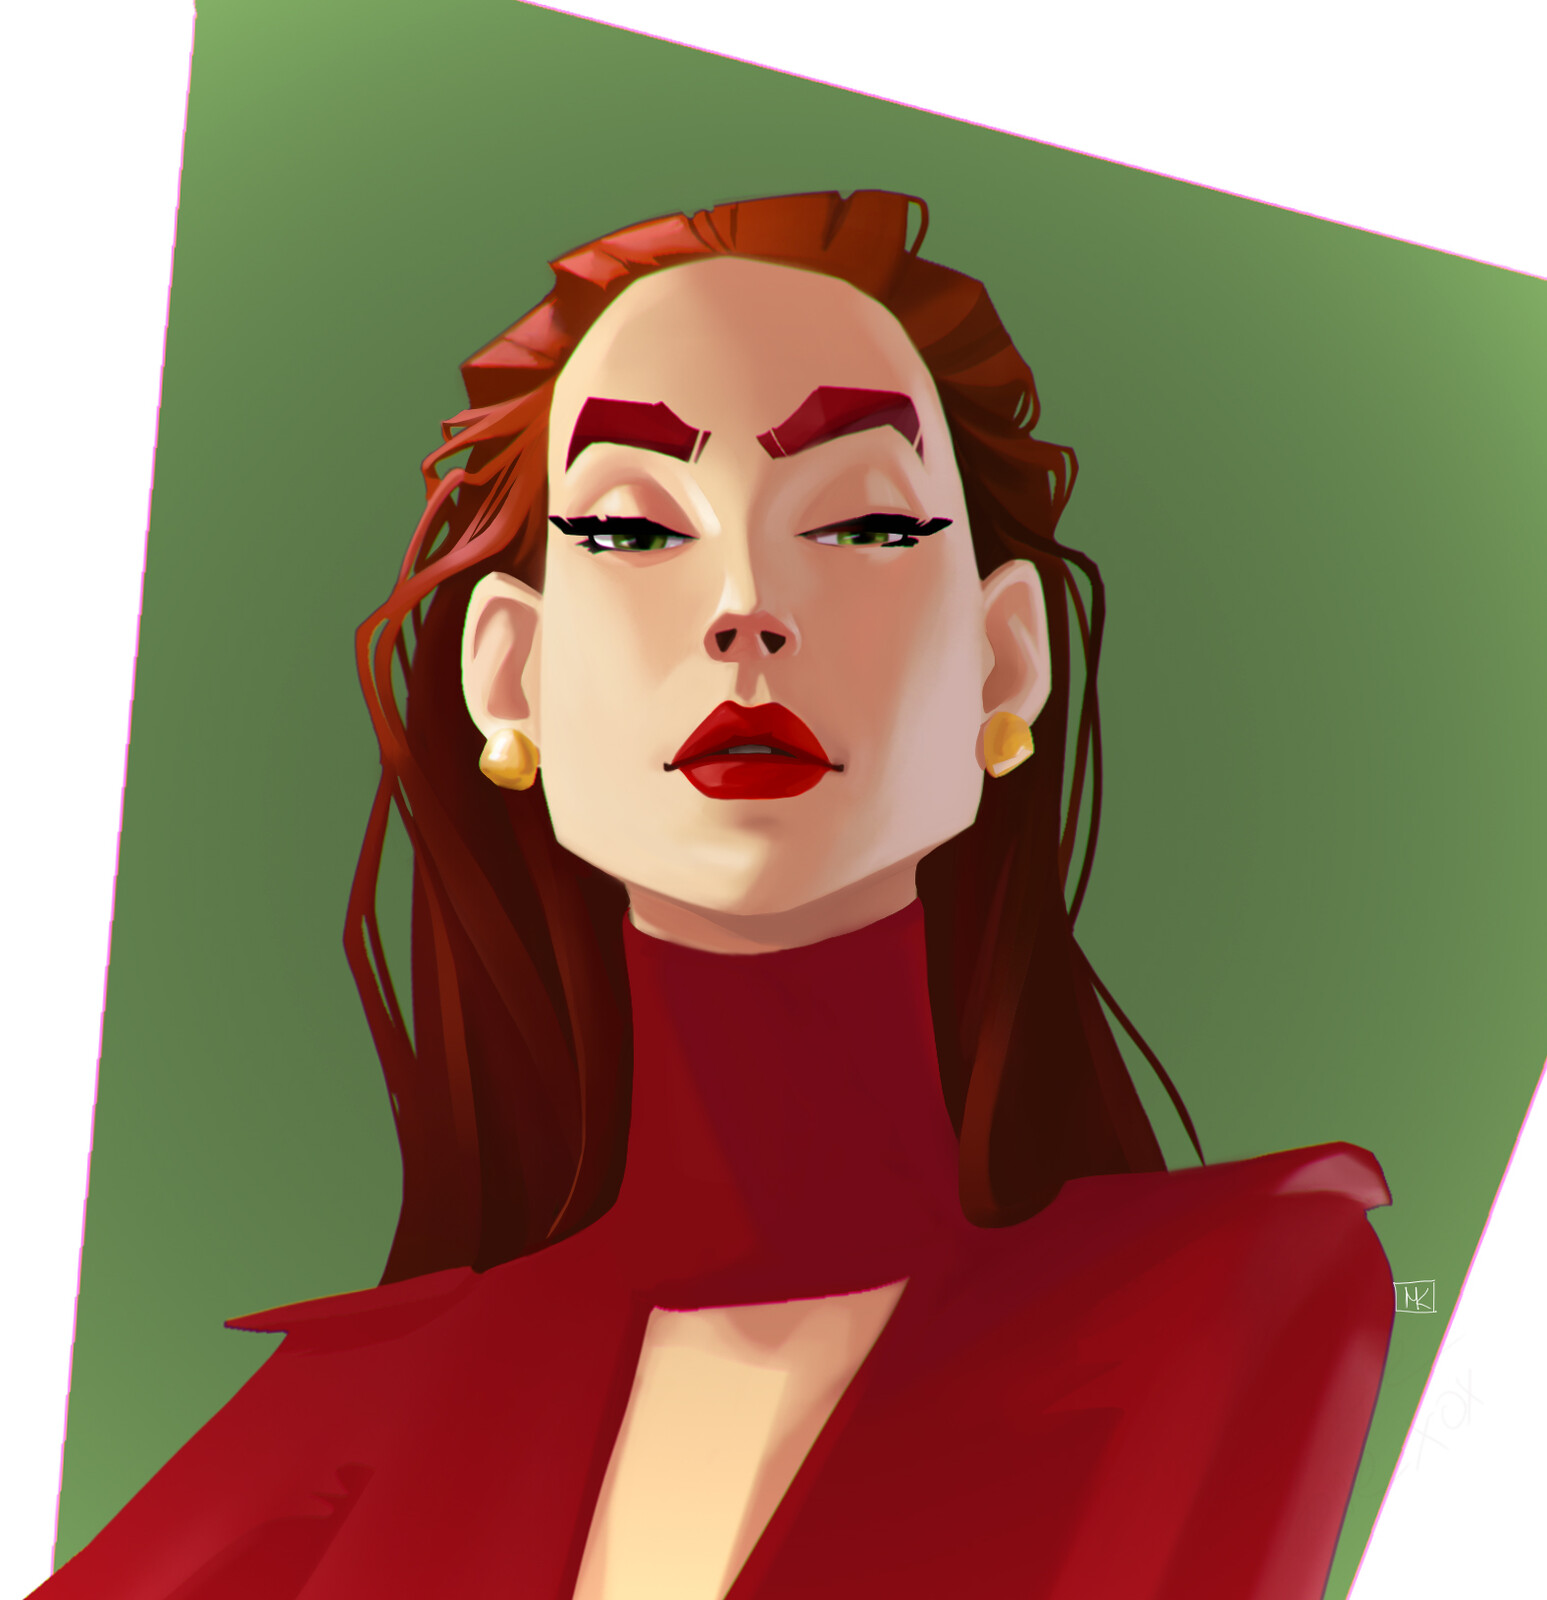 stylized portrait this time "Judgmental" 